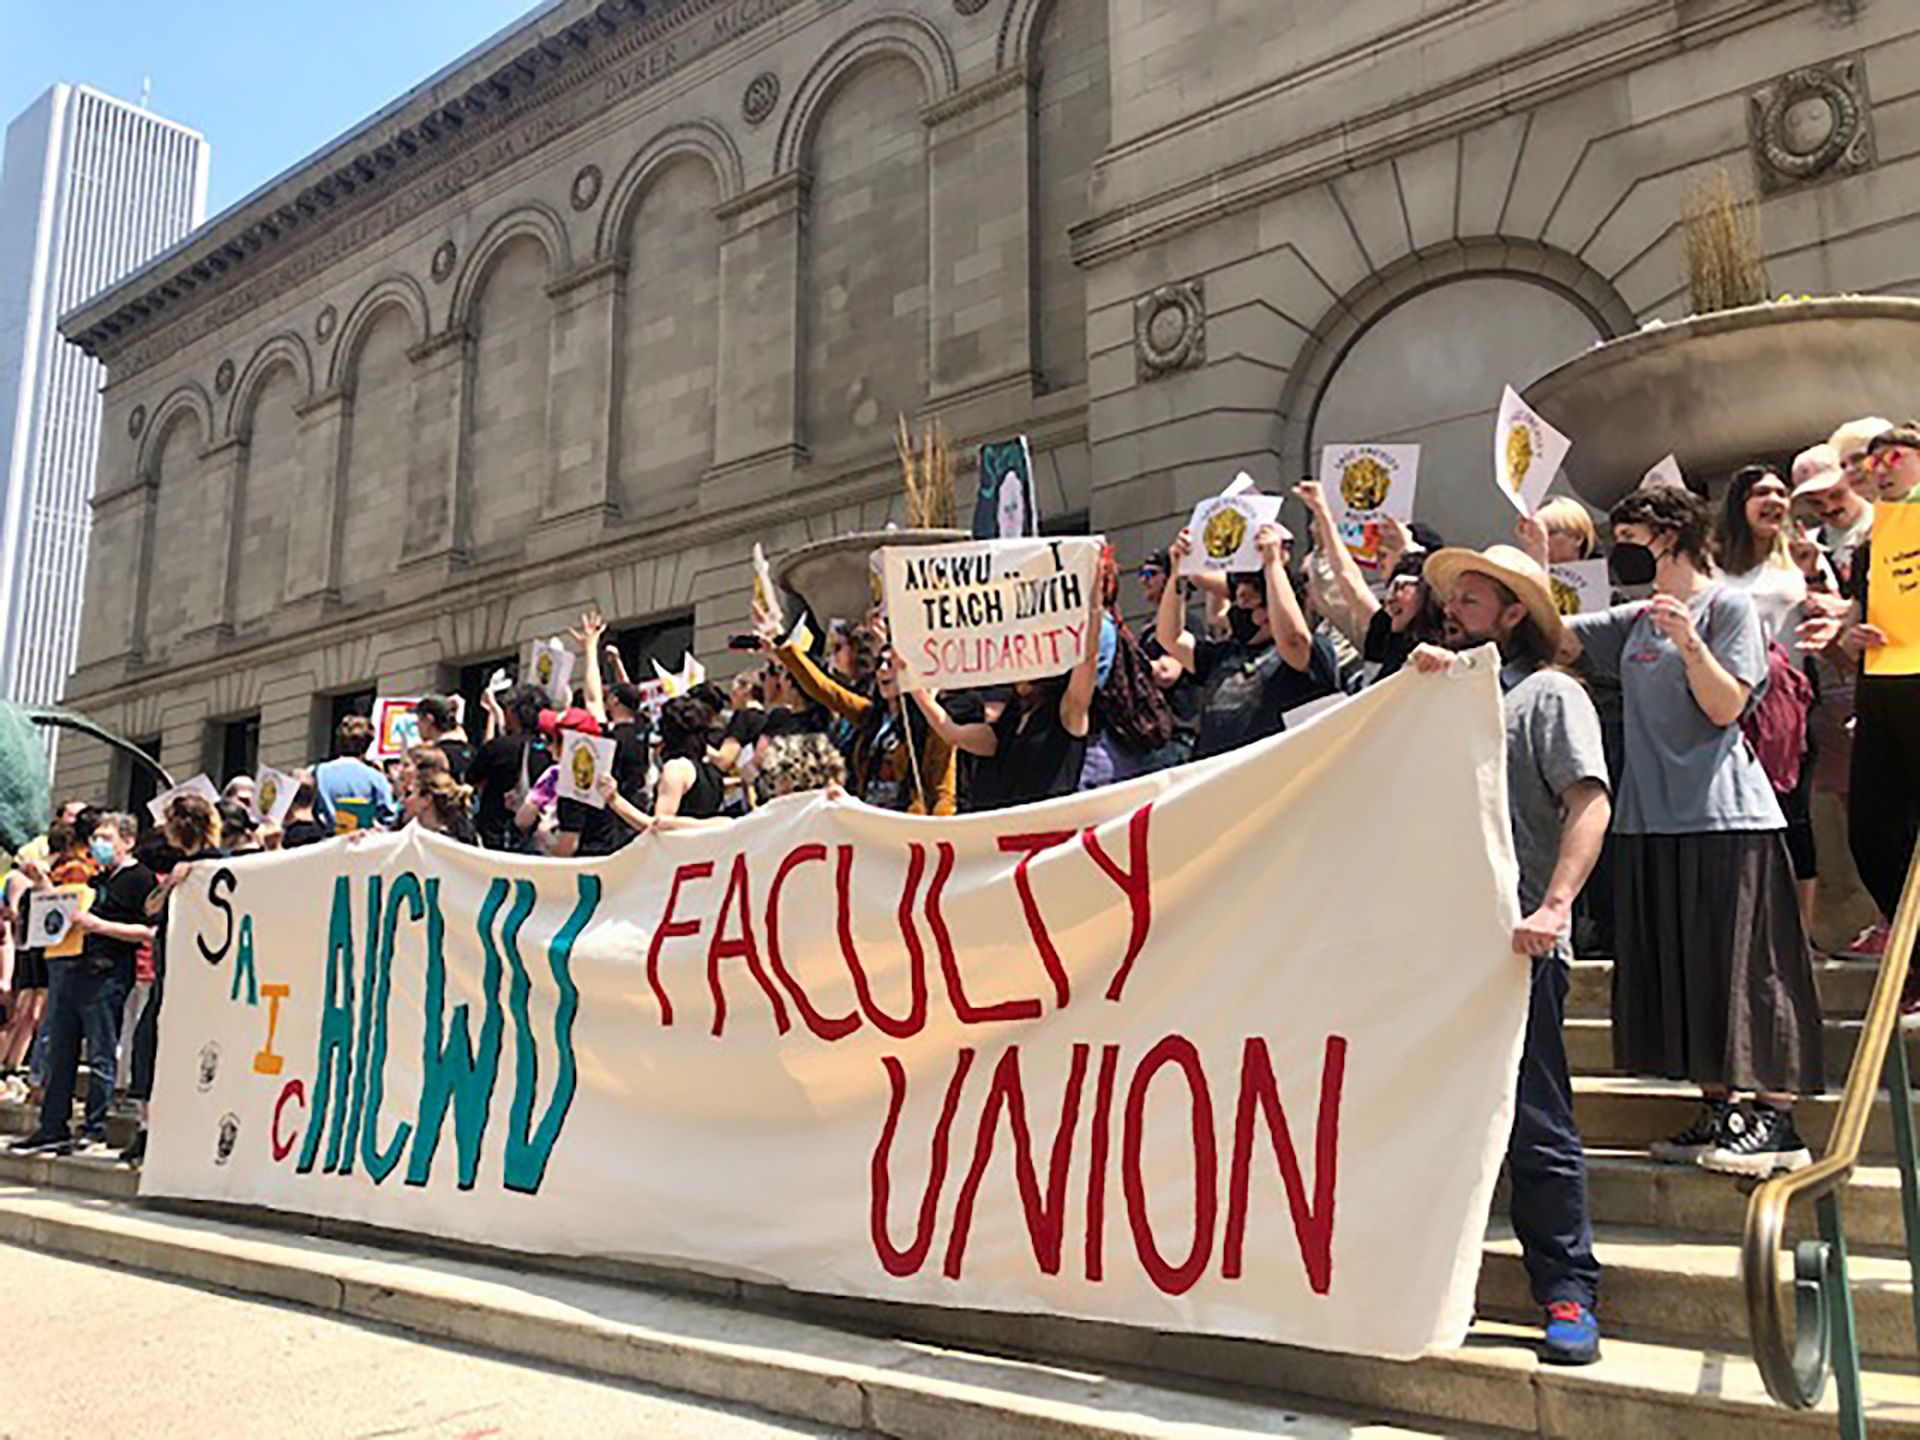 The May 10 rally in favour of the non-tenured faculty union at the School of the Art Institute of Chicago Photo courtesy AICWU/AFSCME